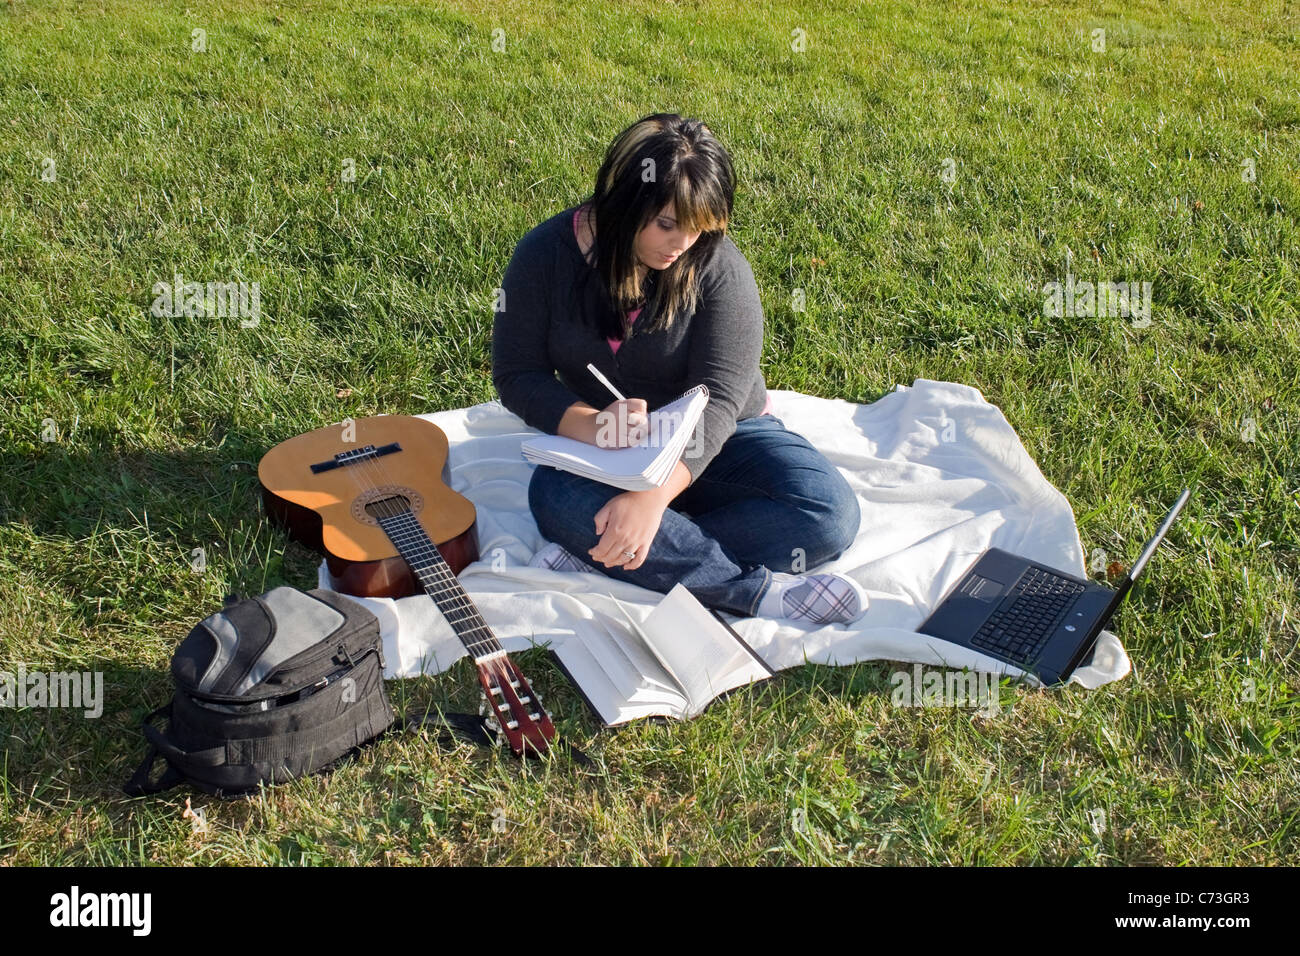 A young female singer or song writer with her guitar and computer outdoors in the grass. Stock Photo